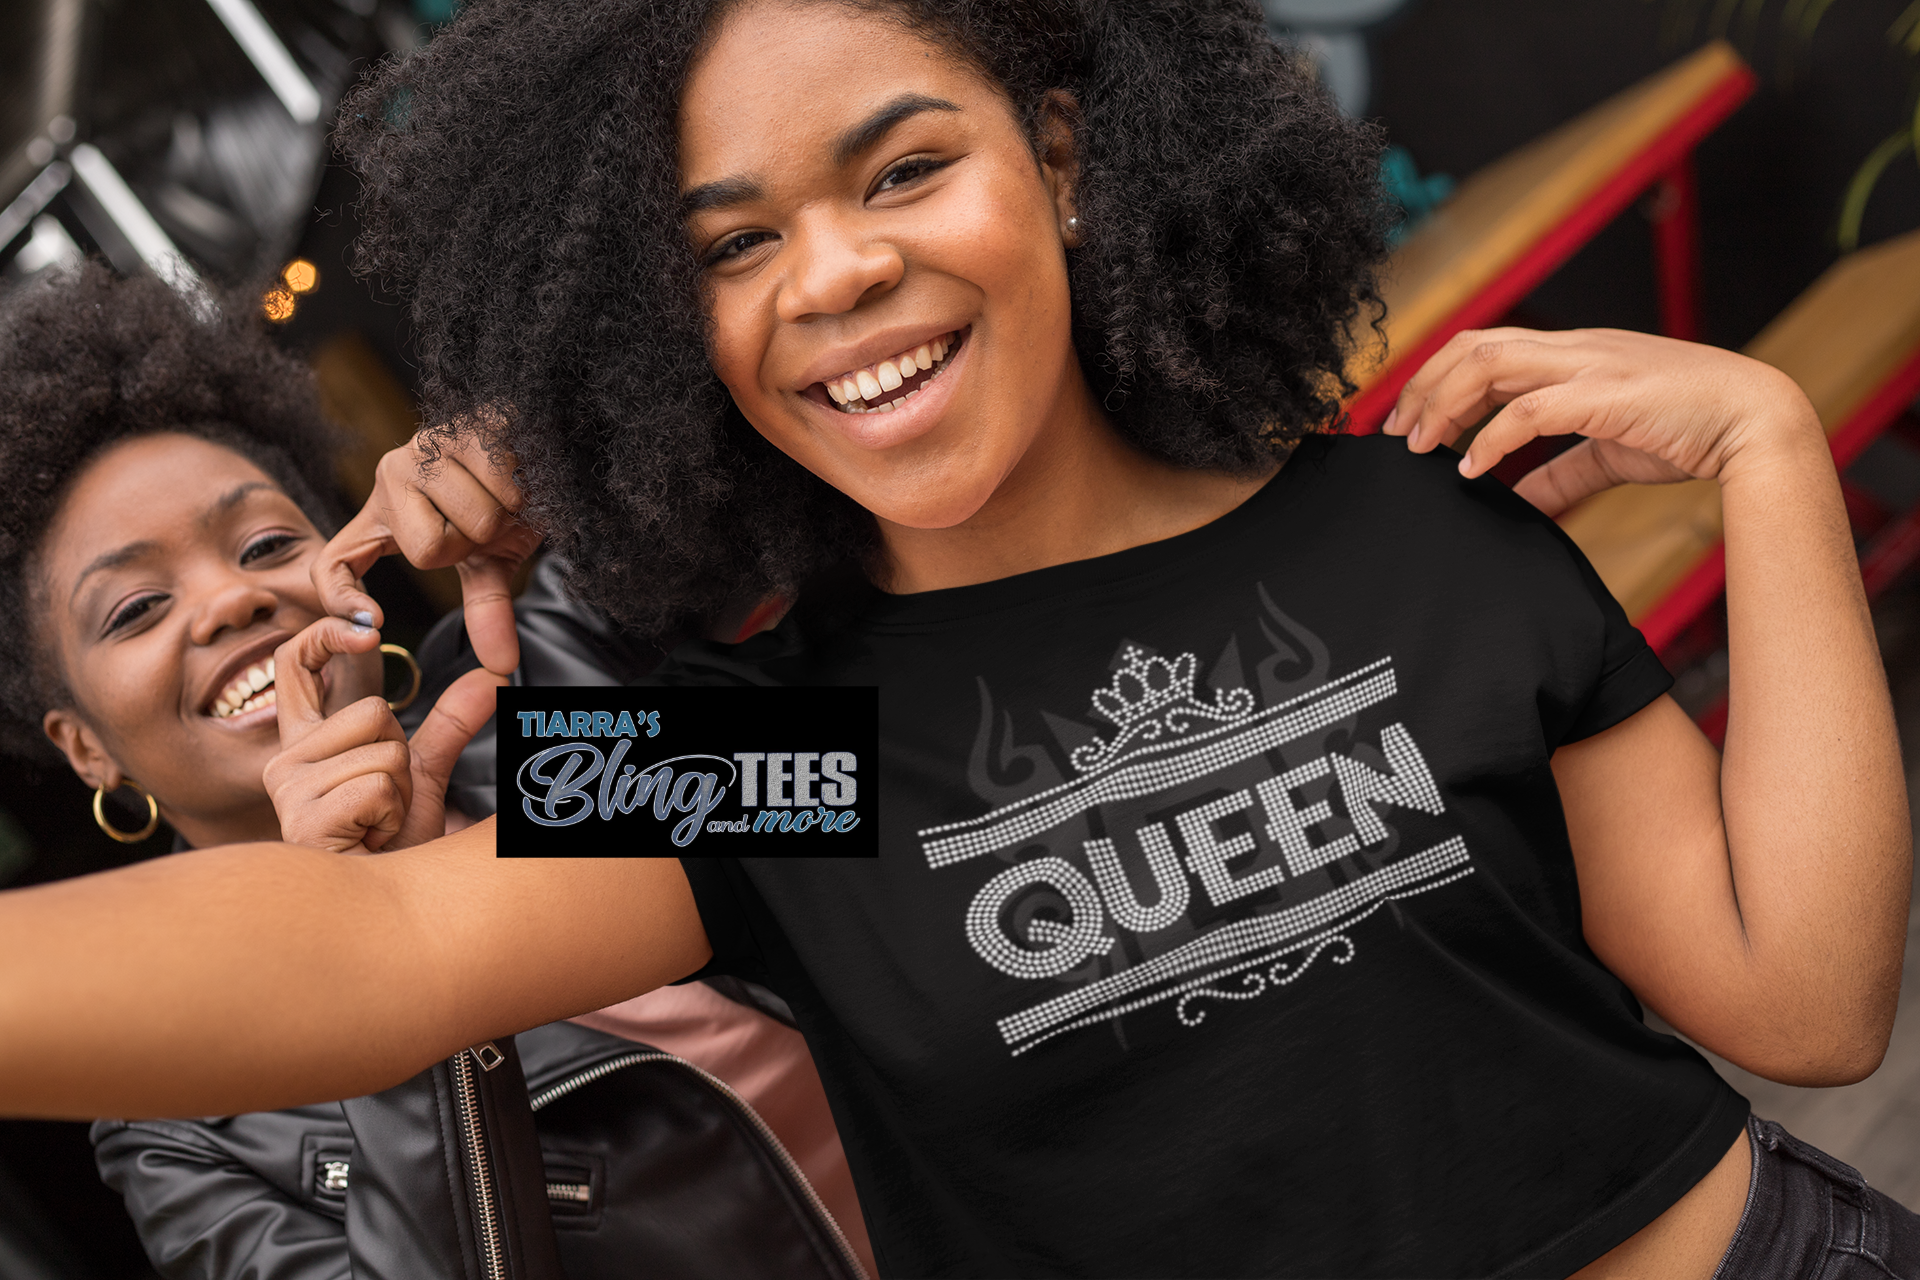 Queen Rhinestone Shirt – Tiarra's Bling Tees and More